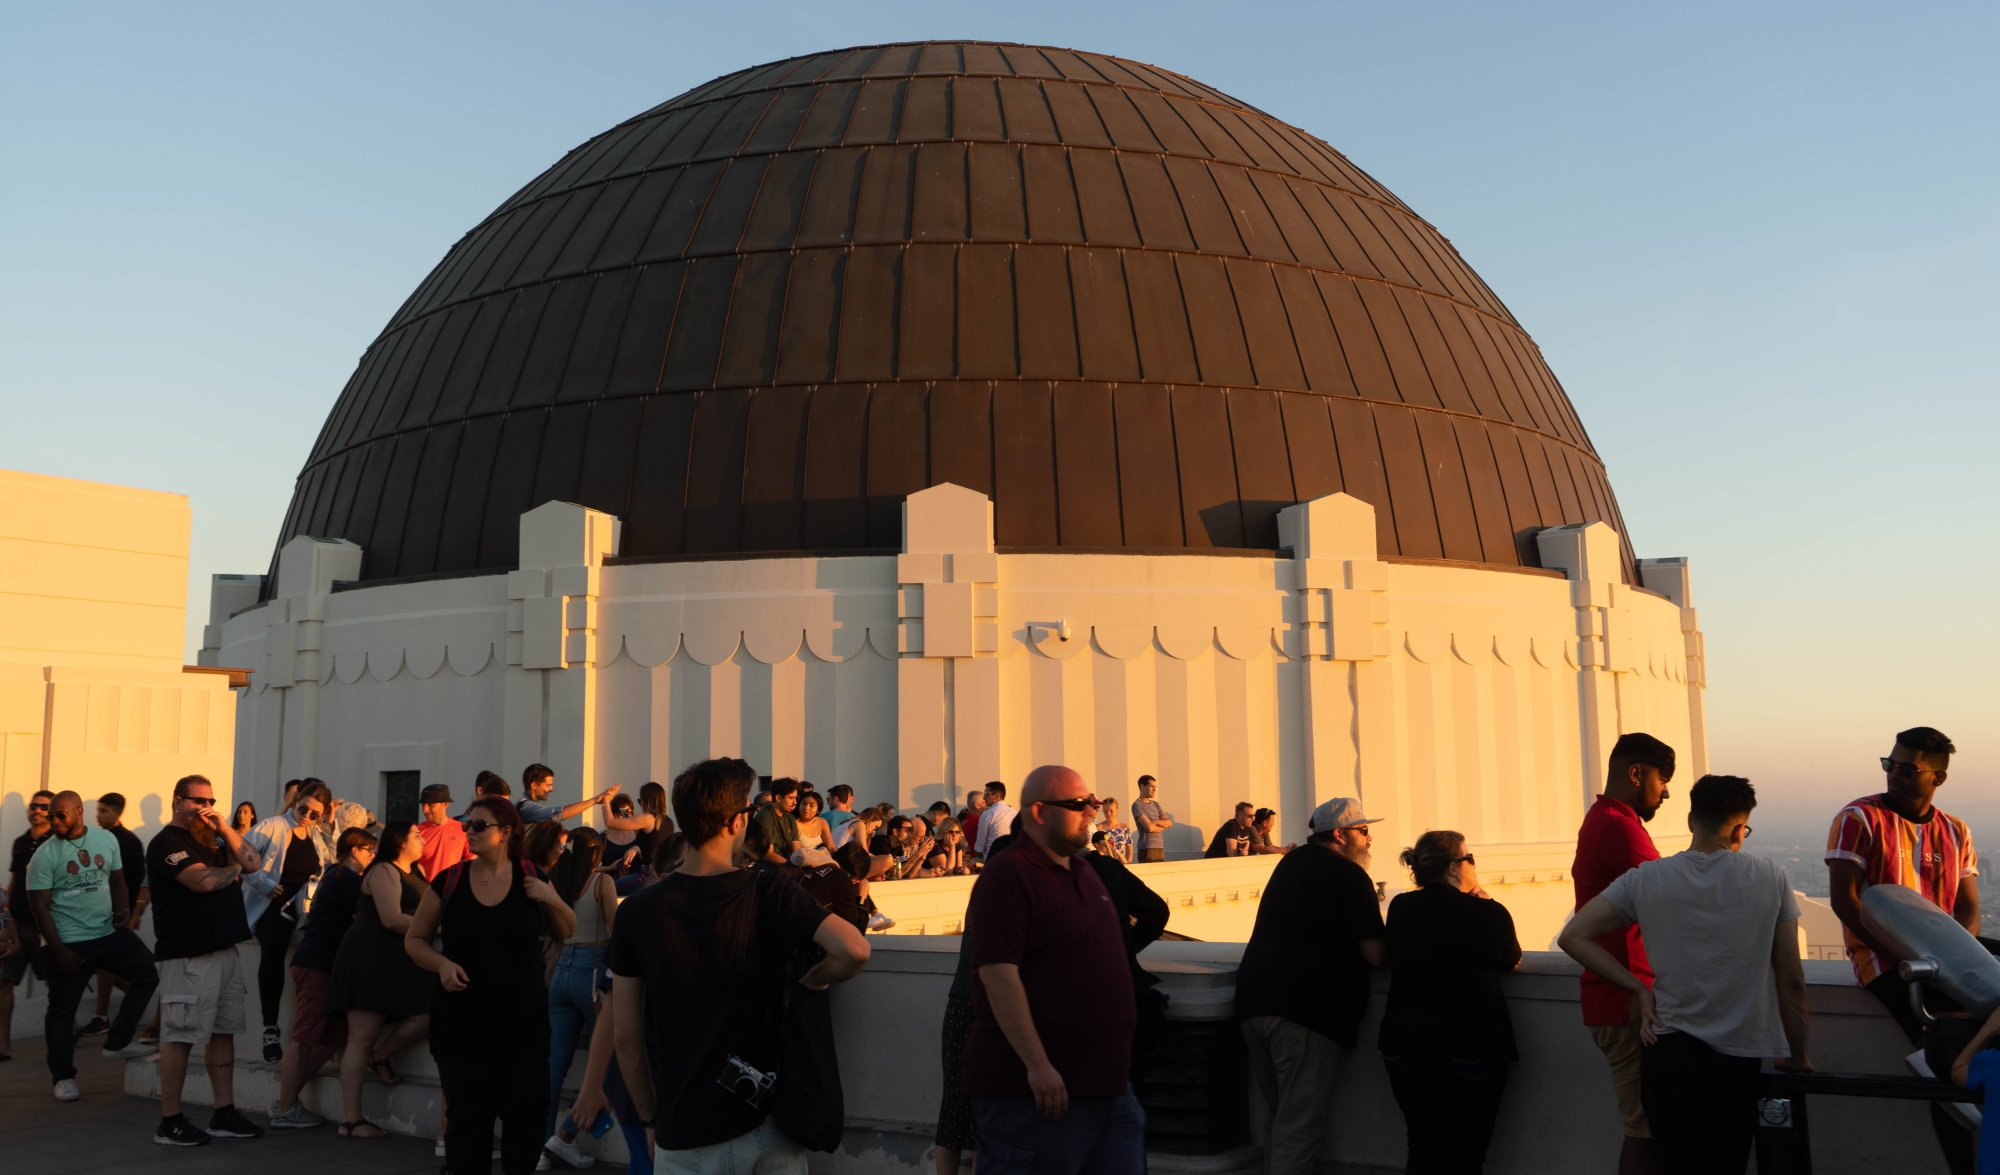 visitar o Griffith Observatory